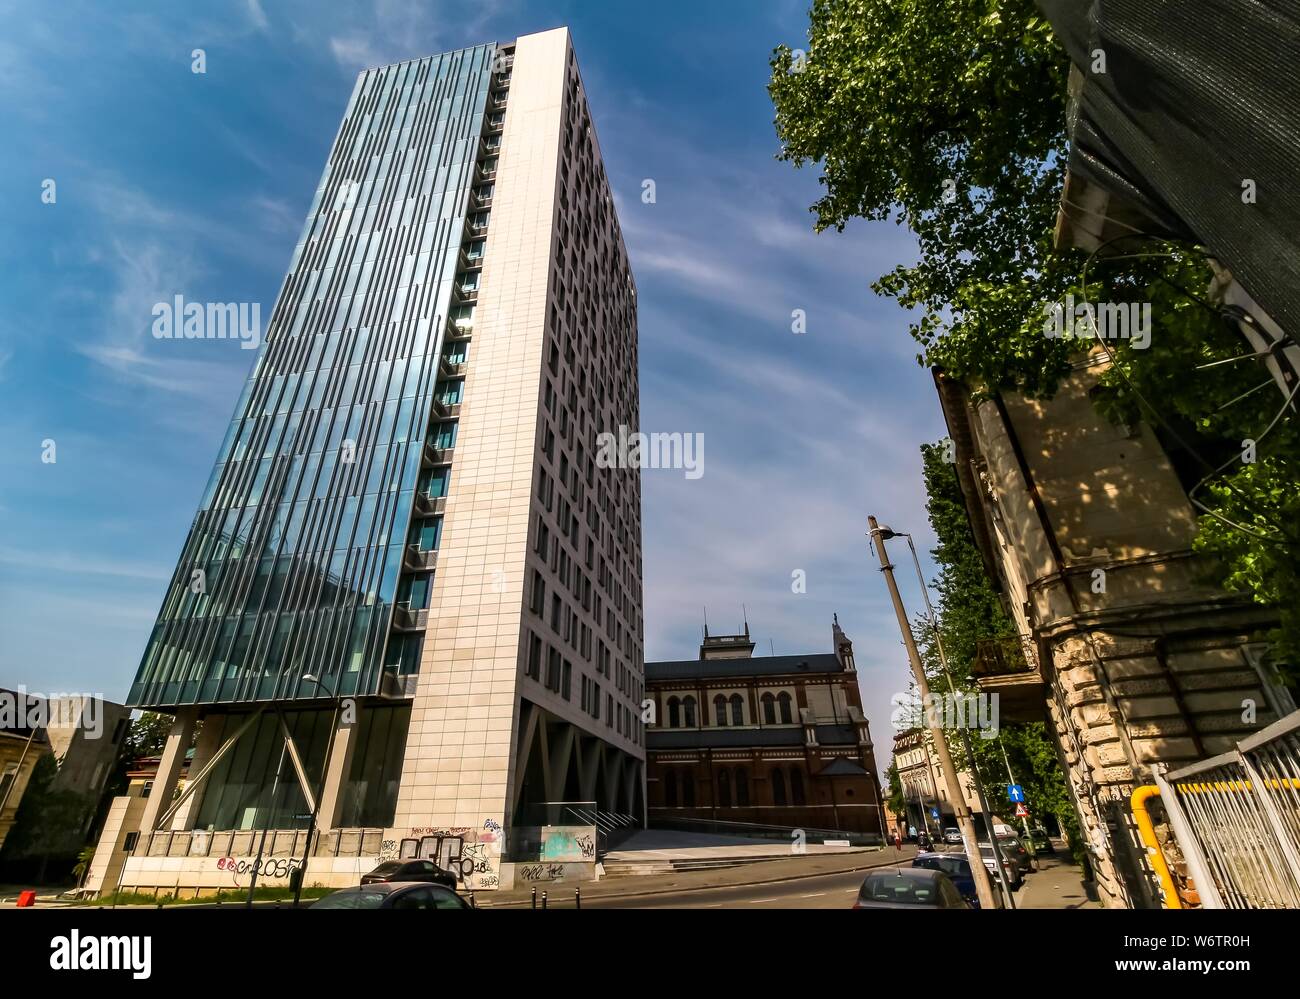 Bucharest, Romania - April 30, 2019: Cathedral Plaza Bucharest building finished in 2011 is still empty due to the trials regarding the legality of th Stock Photo